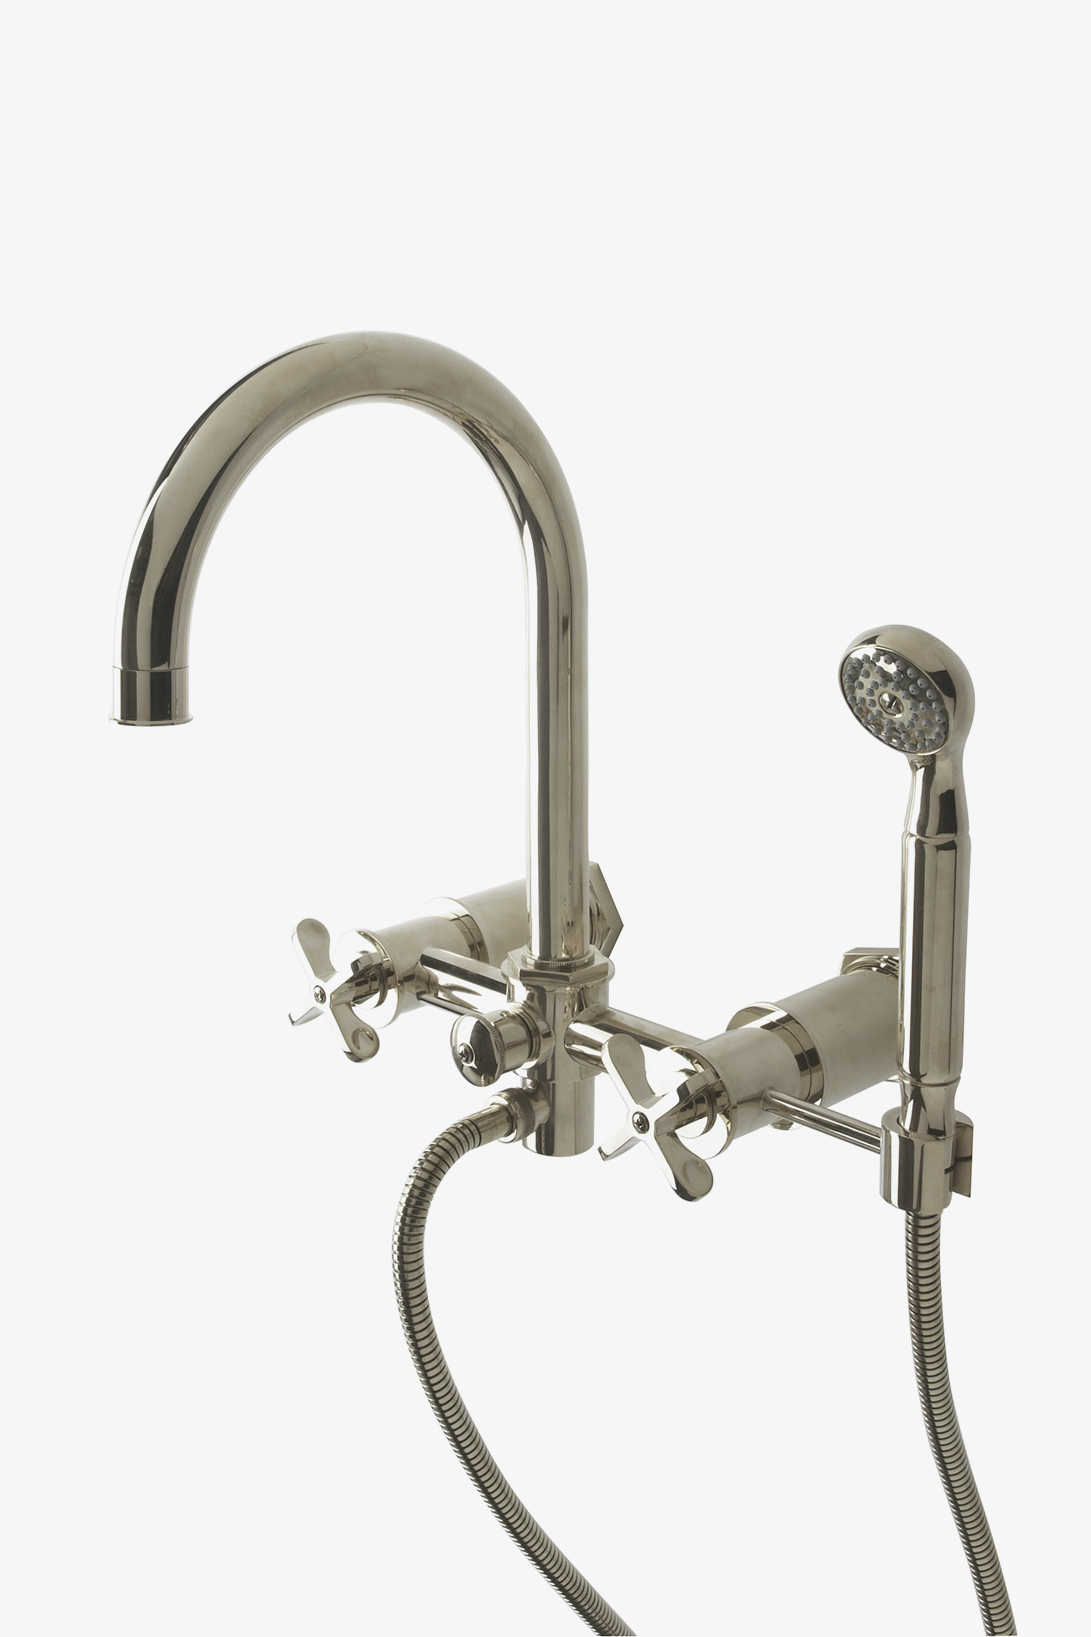 Henry Exposed Wall Mounted Tub Filler